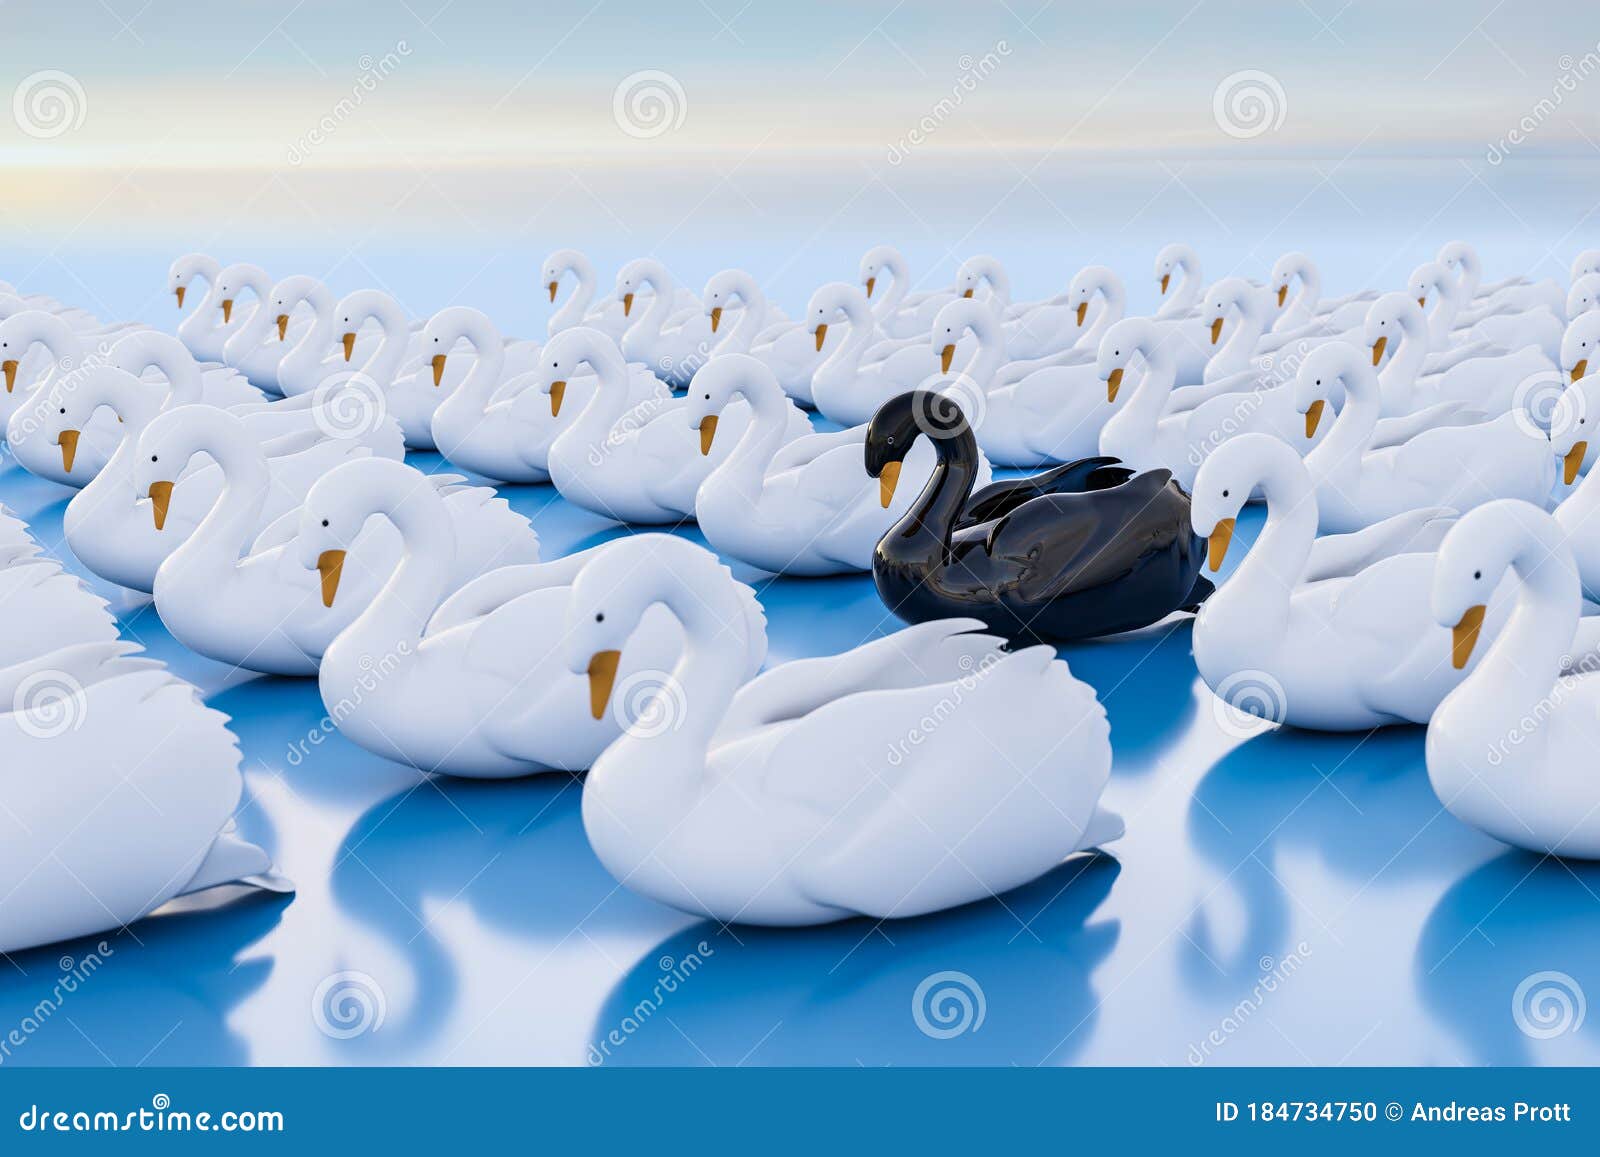 Black Swan Event - Term for a Very Seldom with a Major Effect Often in a Stock Market Crash. Stock Illustration - Illustration of crowd: 184734750